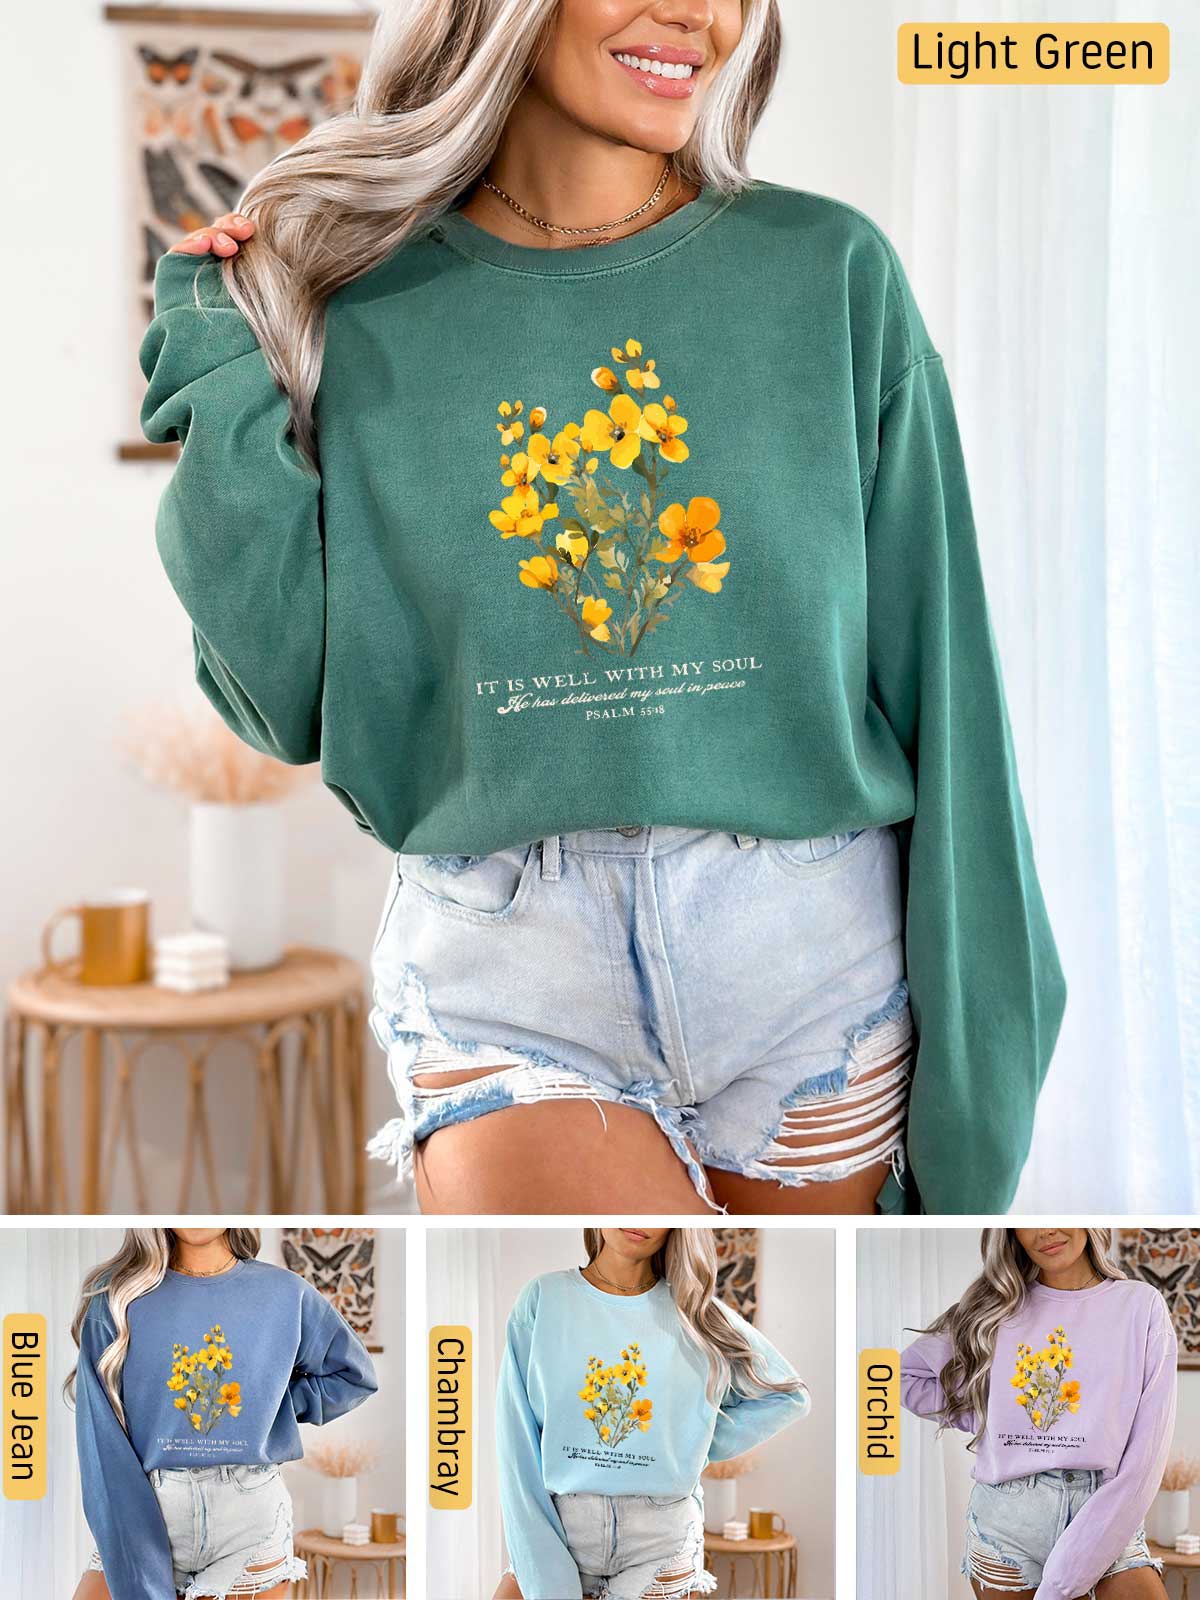 a woman wearing a green sweatshirt with yellow flowers on it